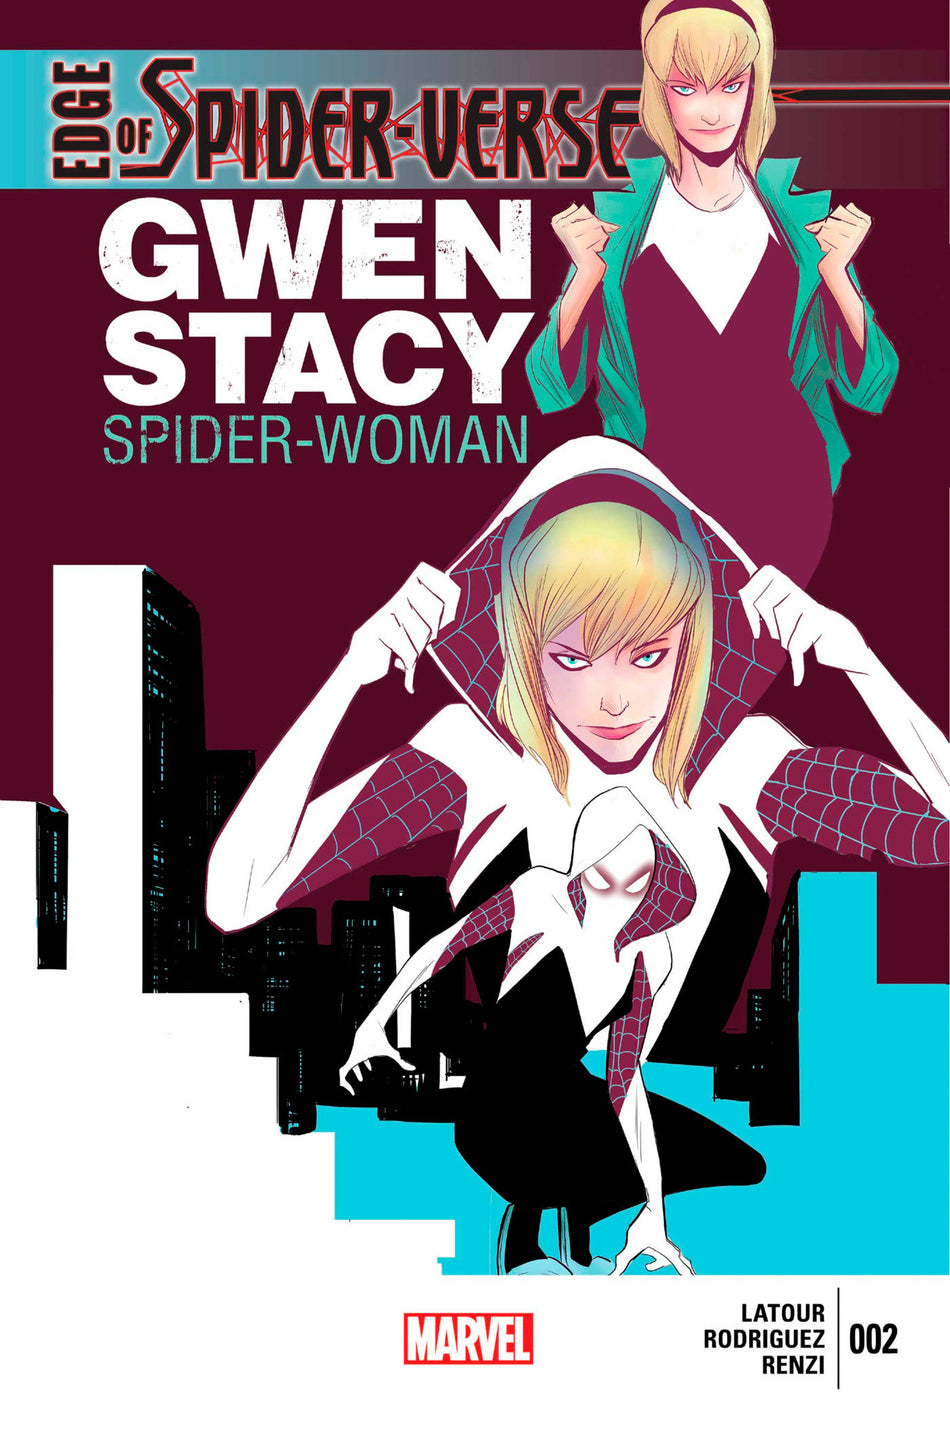 Image of Edge Of Spider-Verse 2 Facsimile Edition comic sold by Stronghold Collectibles.